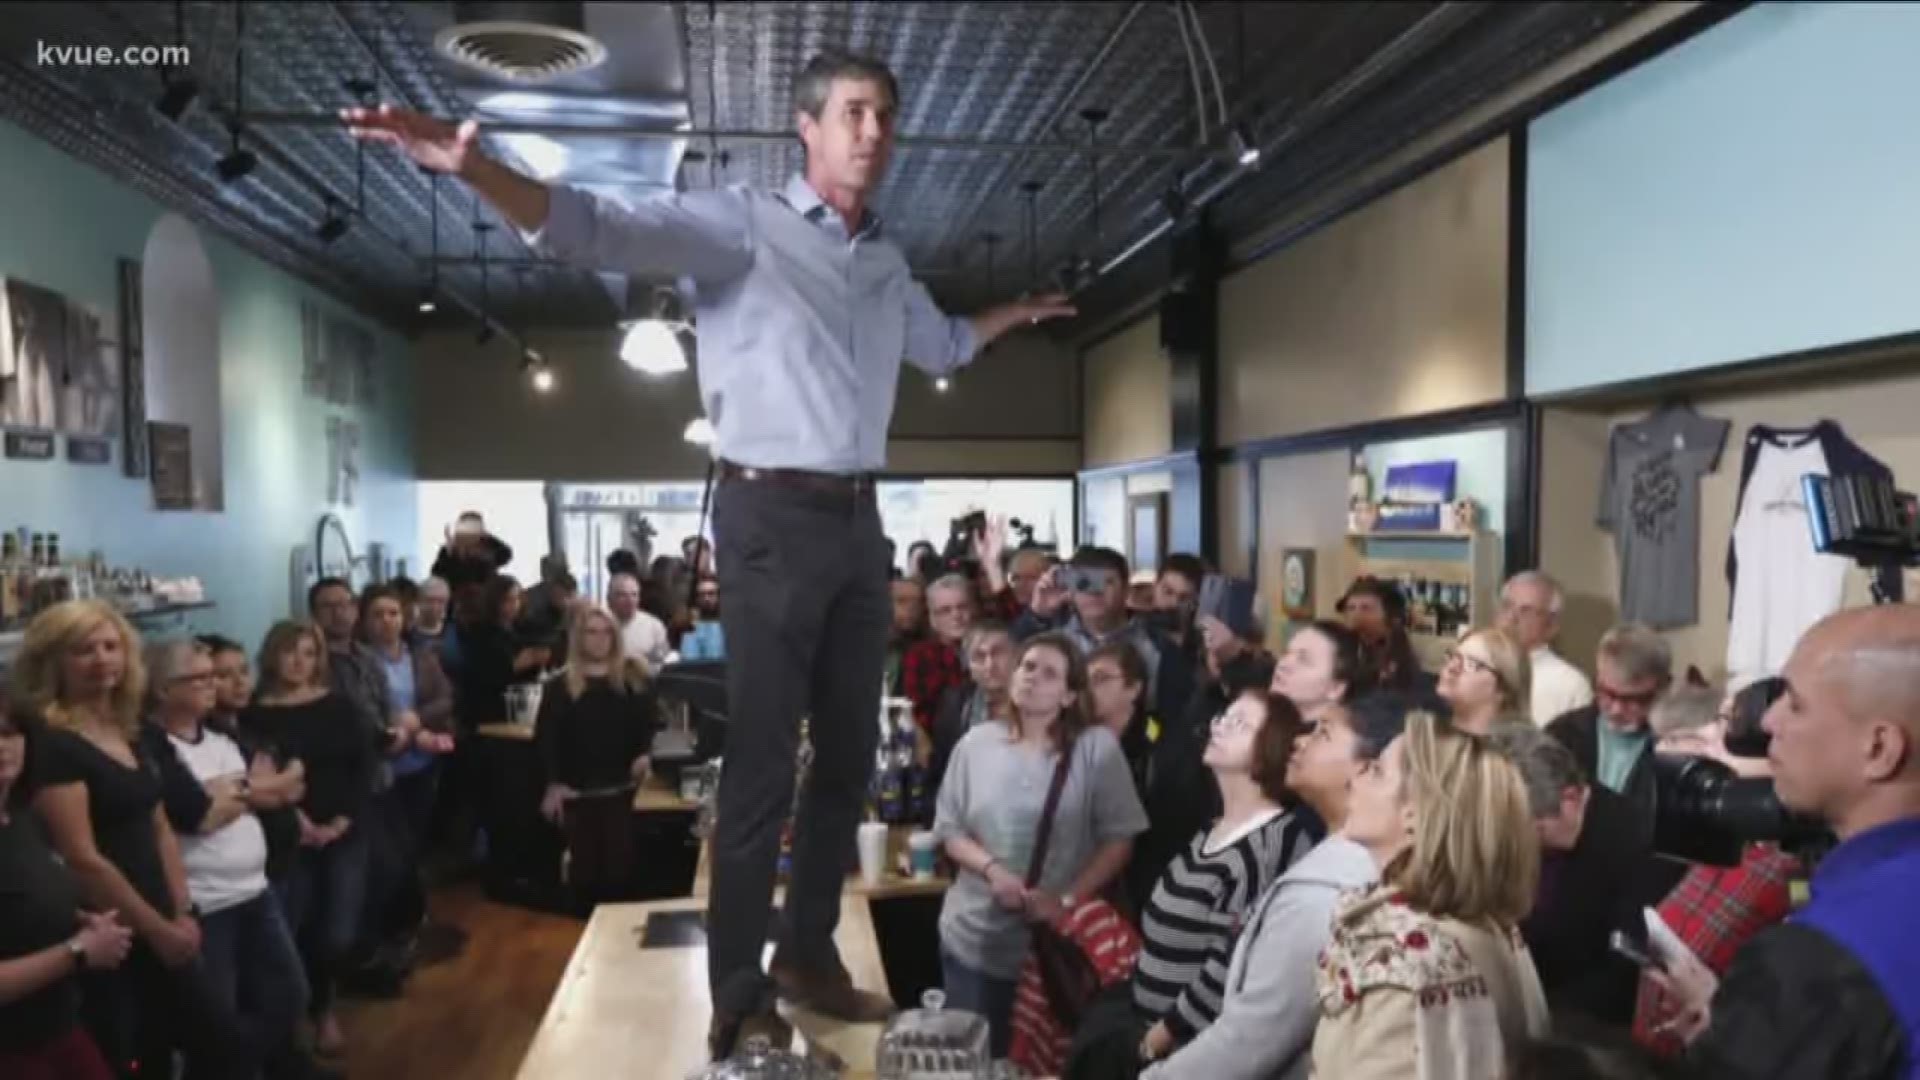 Beto O'Rourke raised a record-breaking $6,136,763 in online contributions during the first 24 hours of his grassroots campaign for President of the United States, according to his campaign.